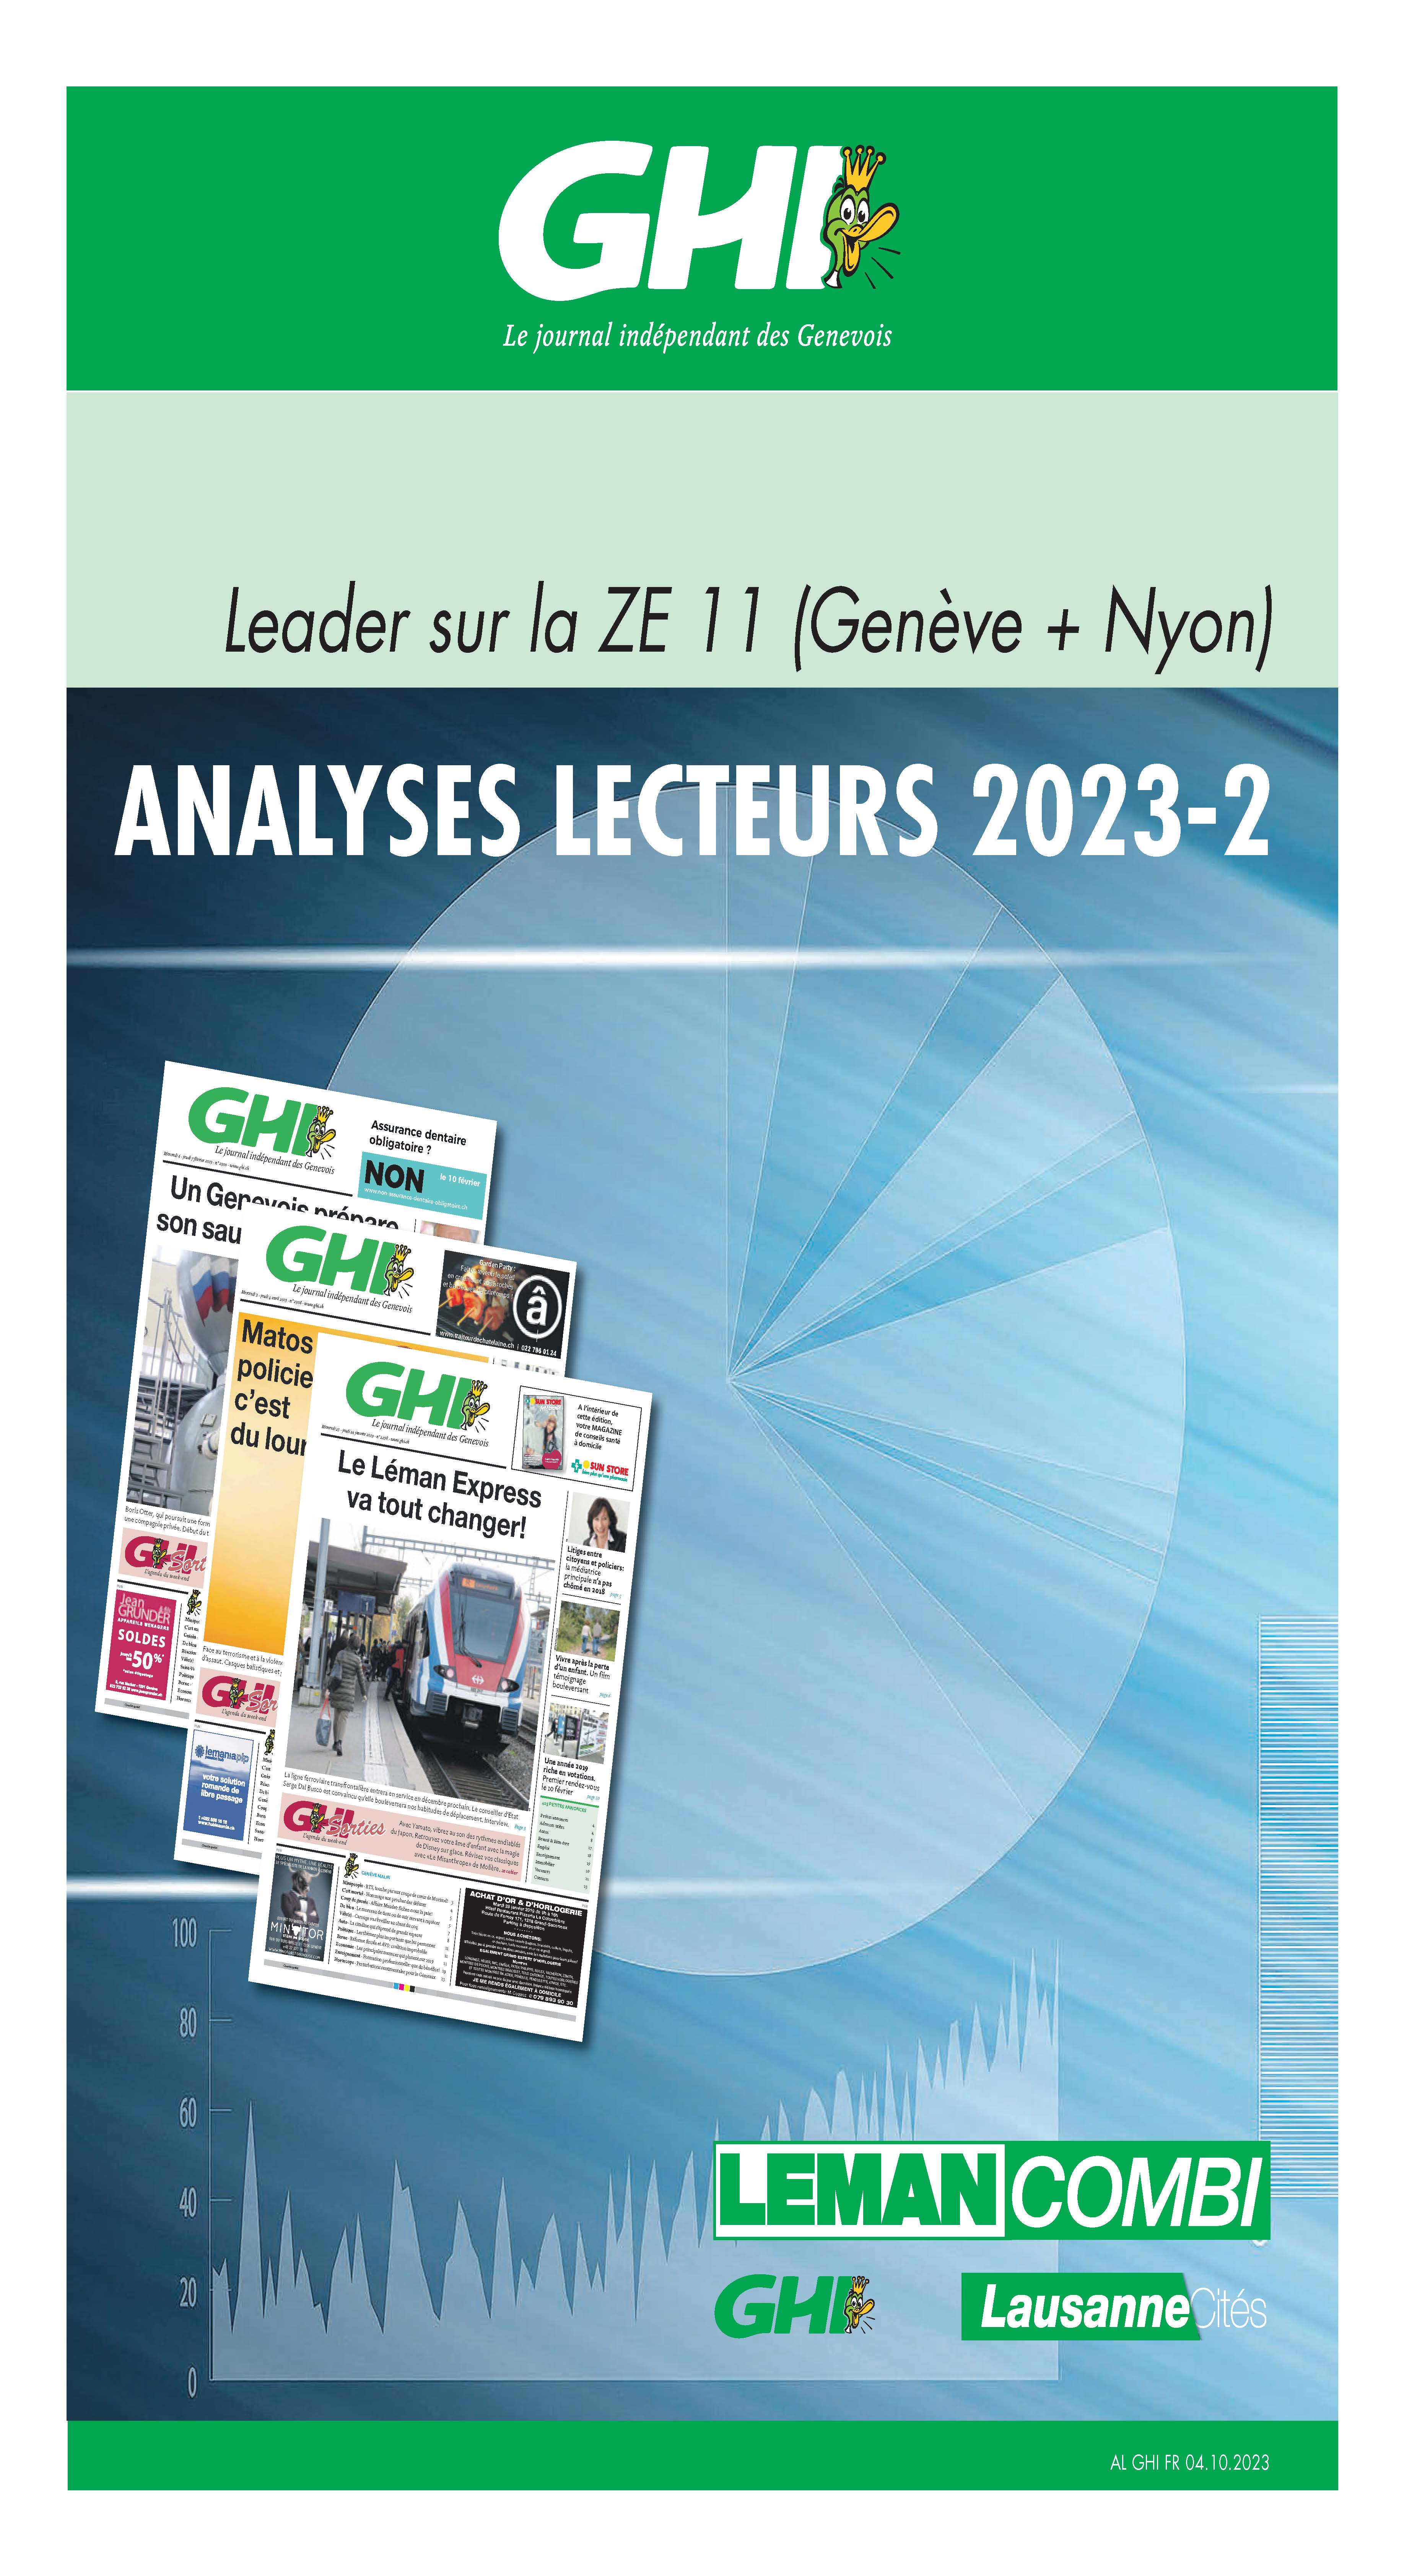 Analyses lecteurs GHI 2023-2